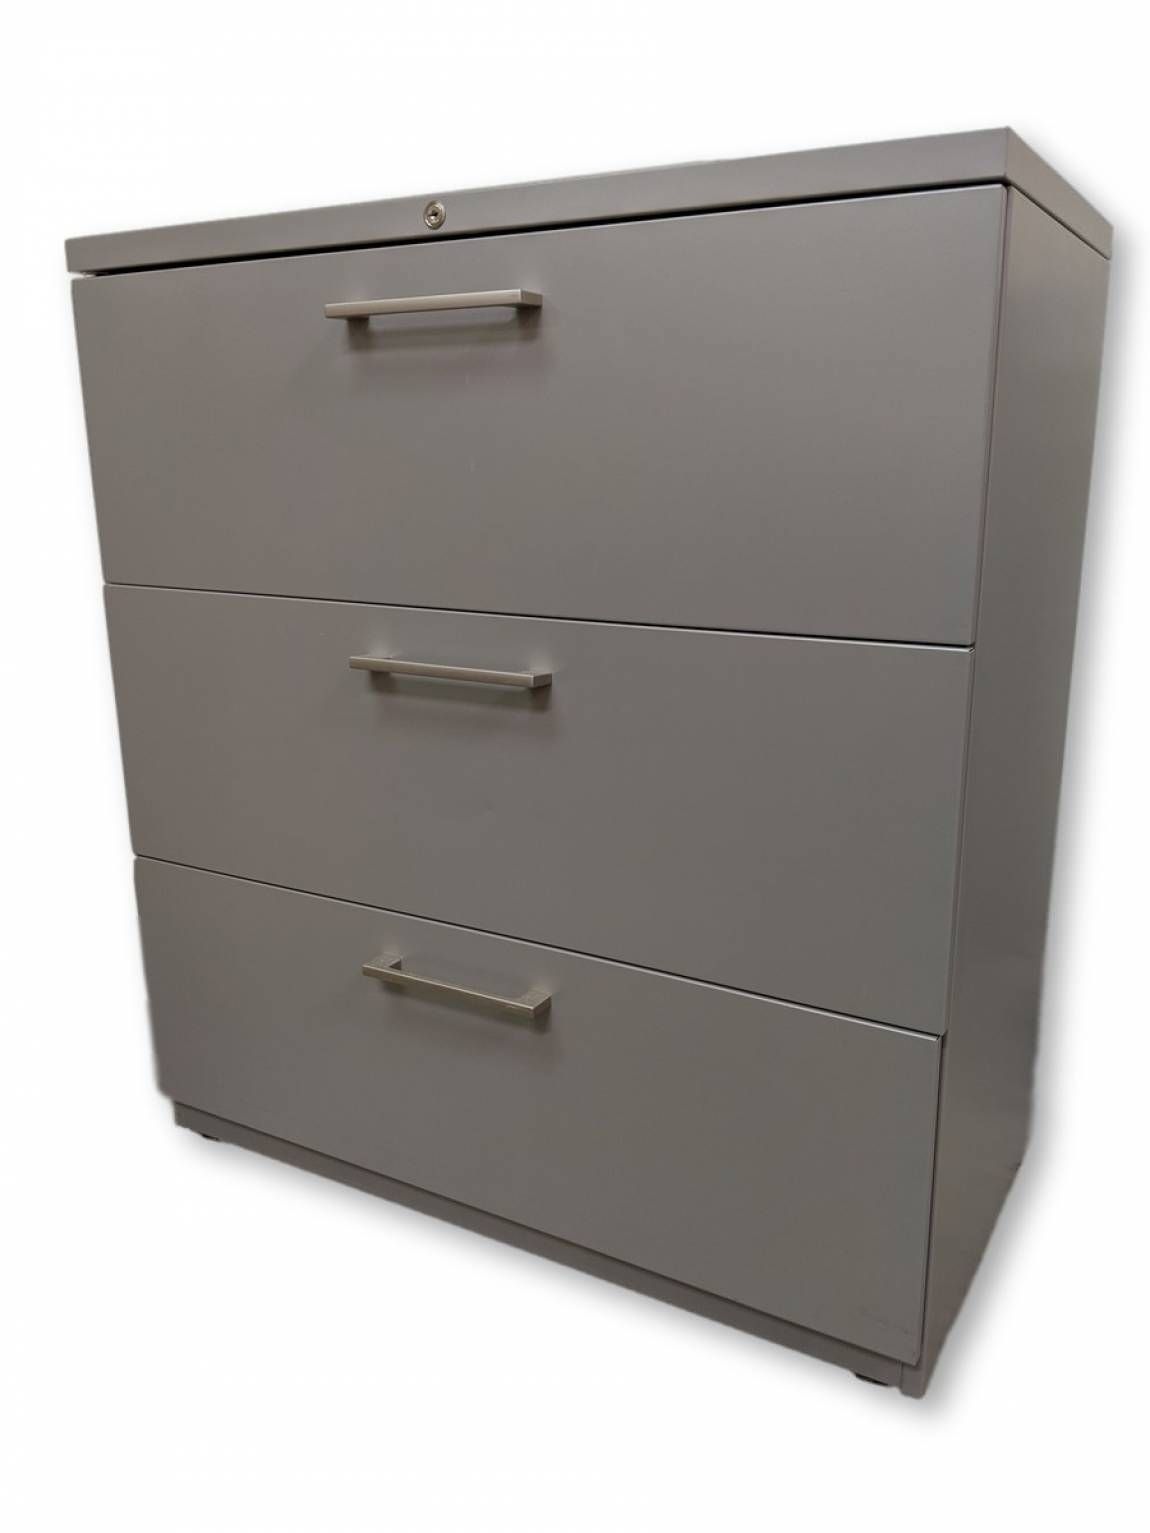 Haworth 3 Drawer Lateral Filing Cabinet 36 Inch Wide